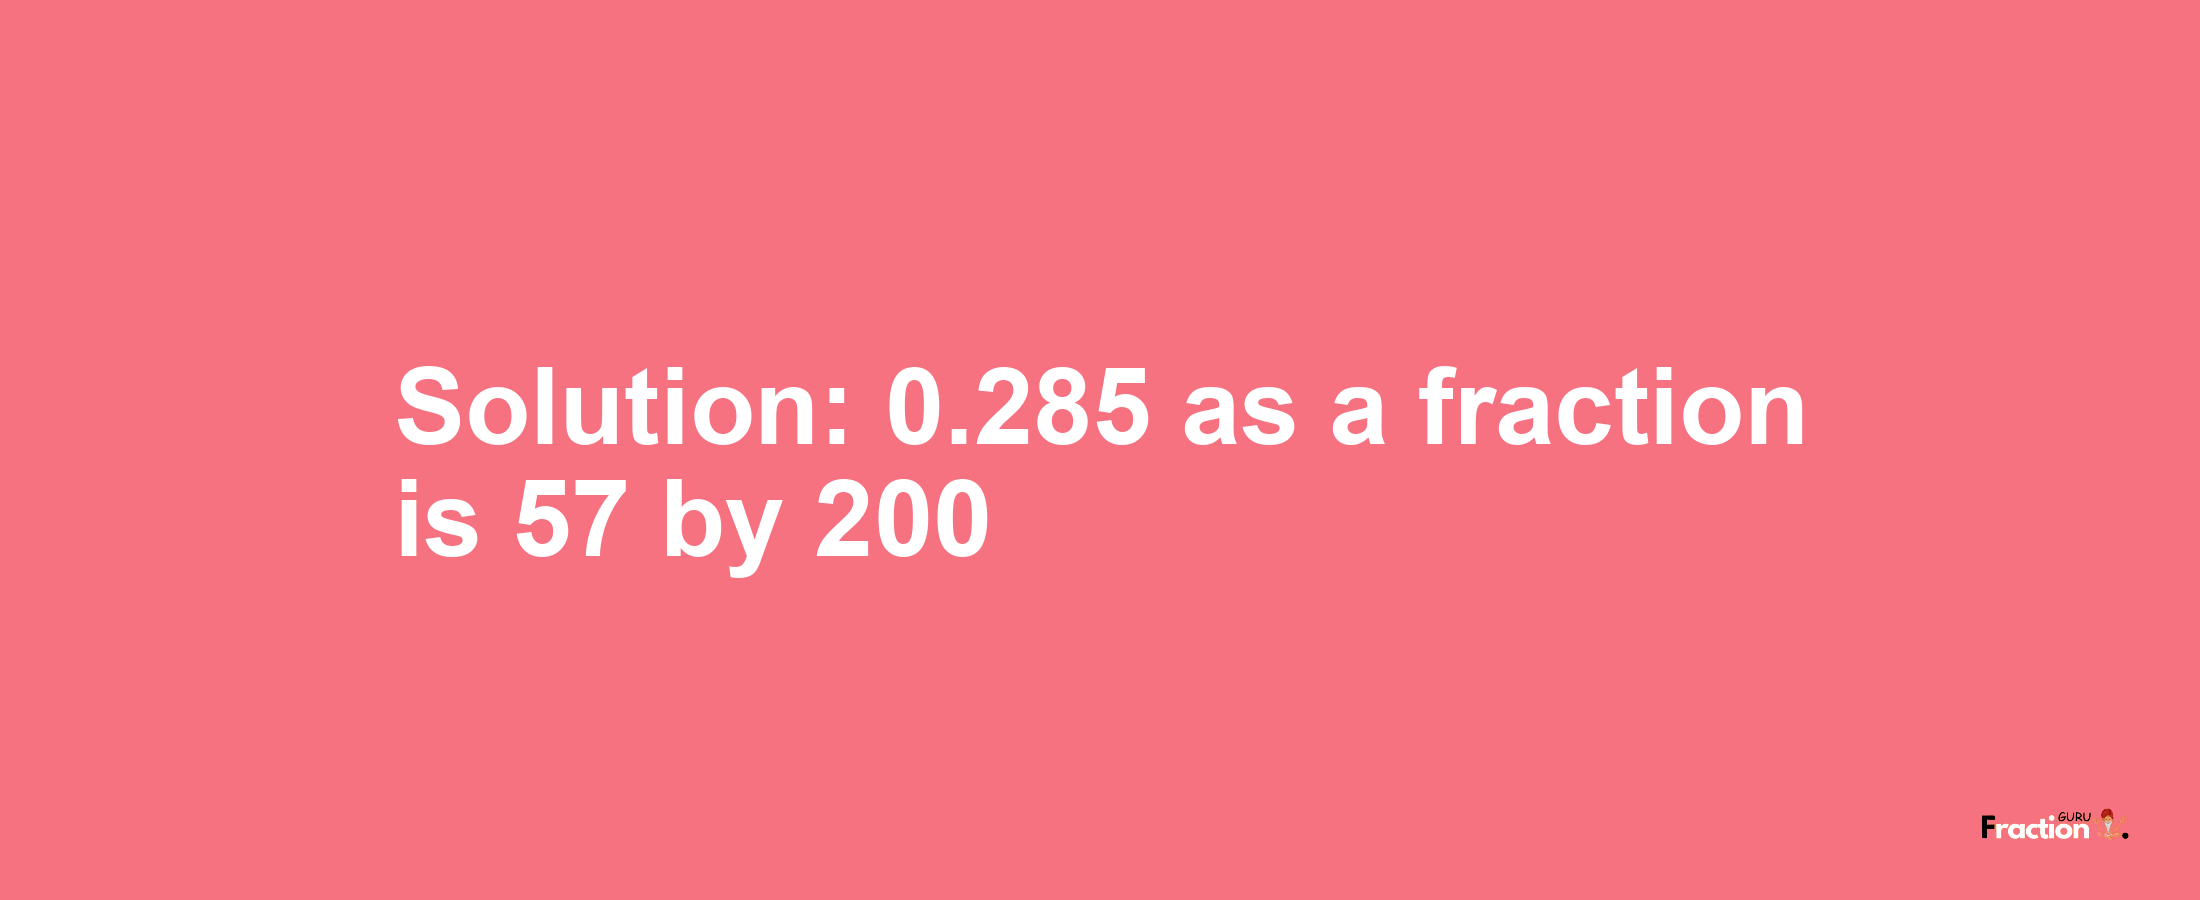 Solution:0.285 as a fraction is 57/200